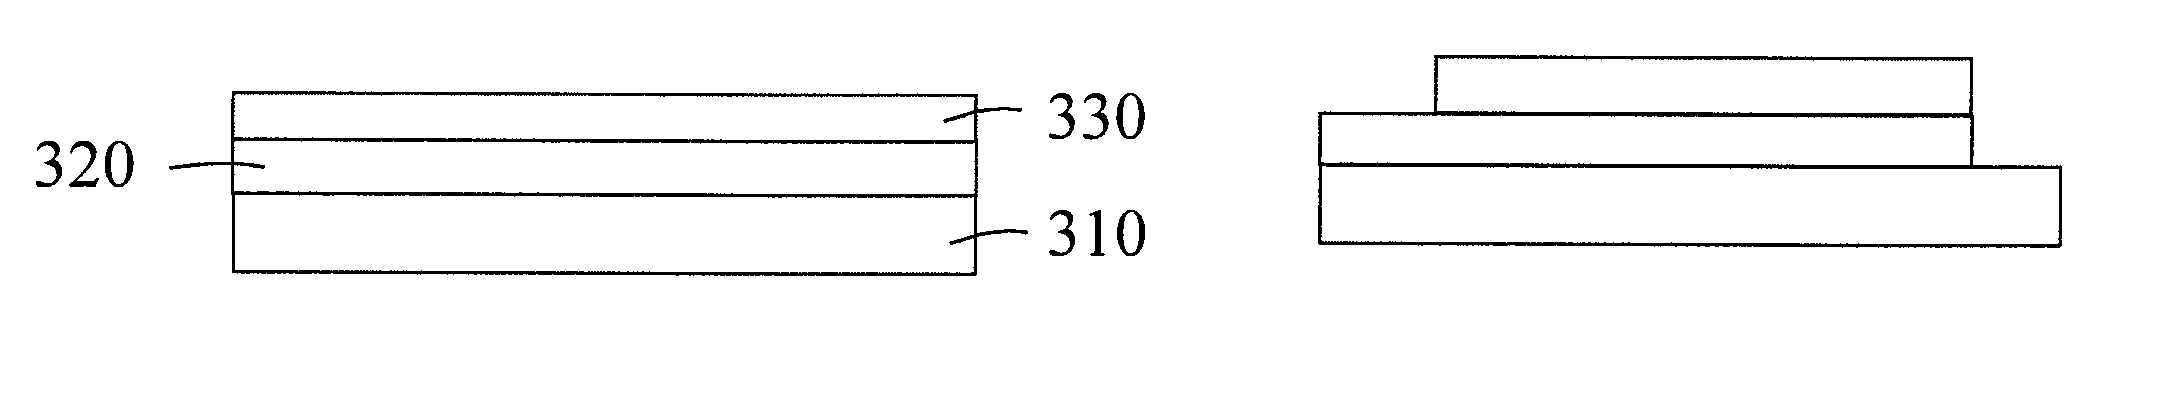 Method for manufacturing electrochromic devices